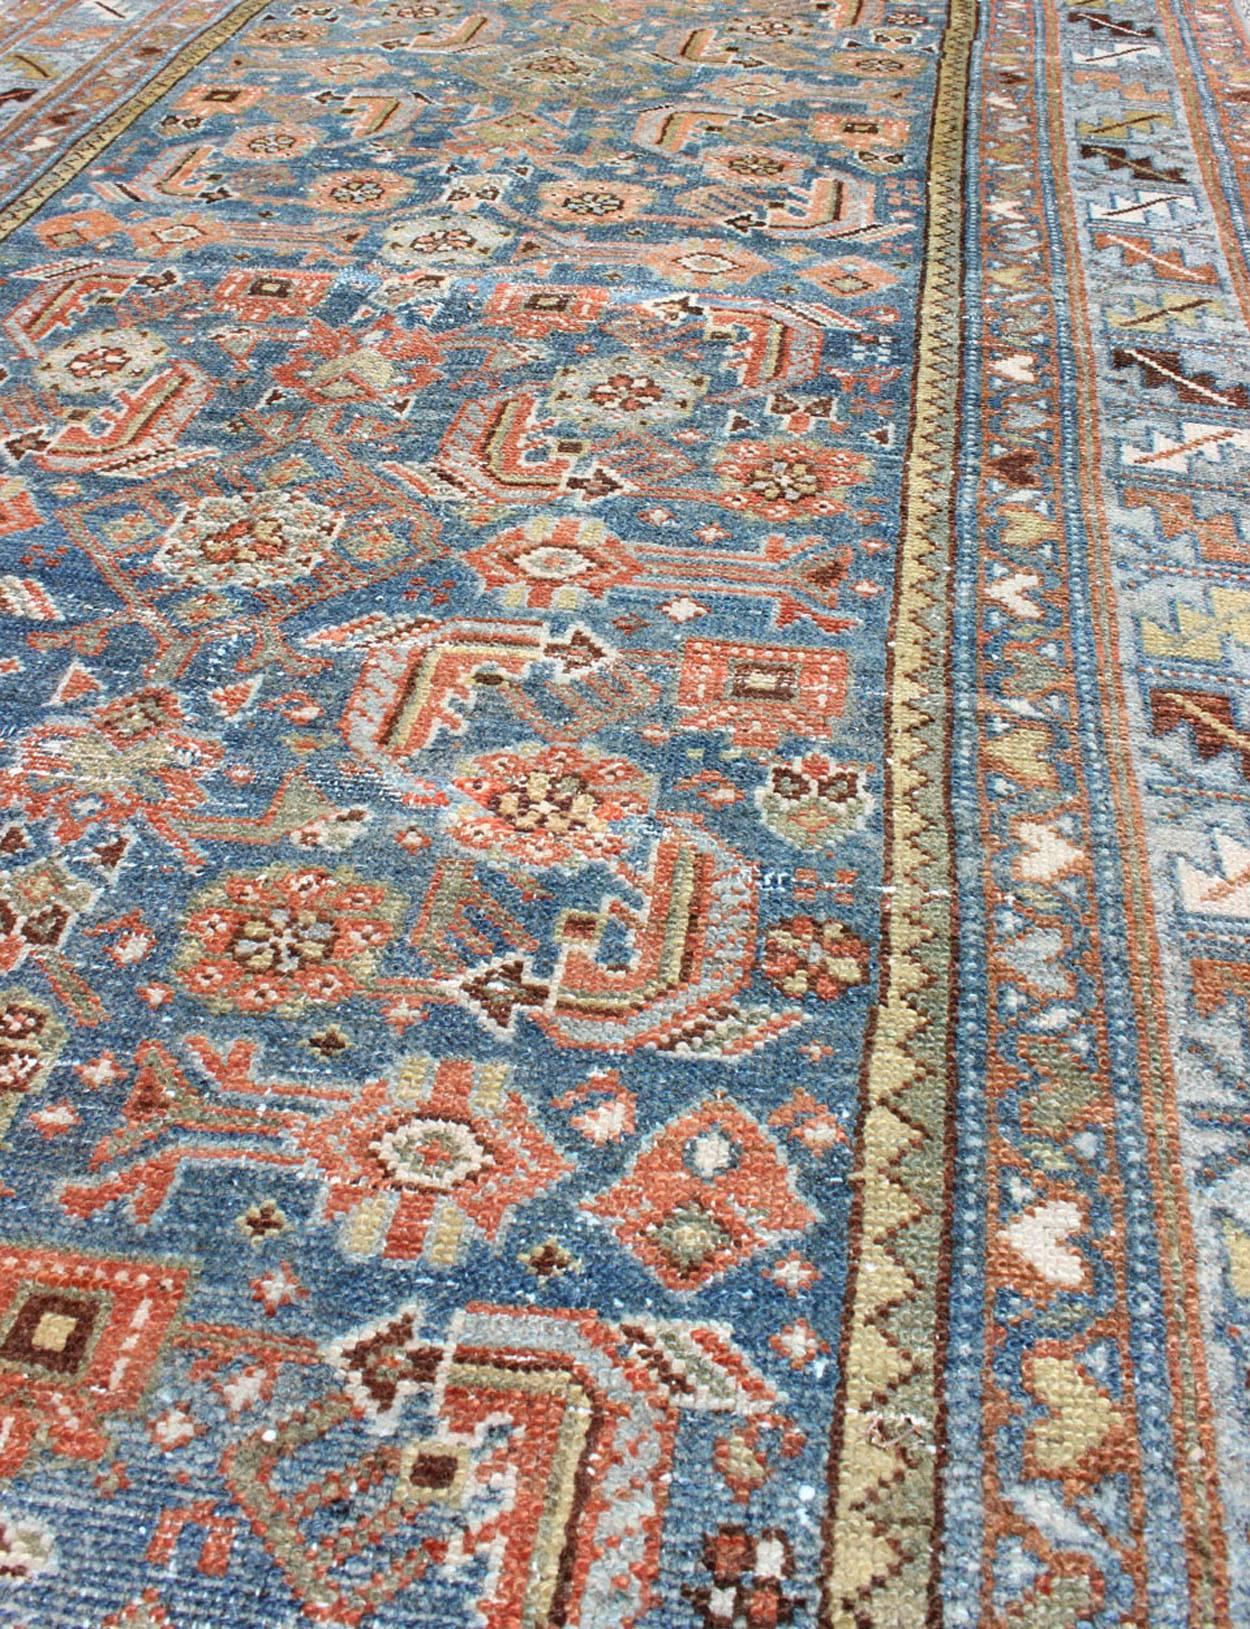 Antique Persian Malayer Runner in Light Blue and Salmon Pink In Good Condition For Sale In Atlanta, GA